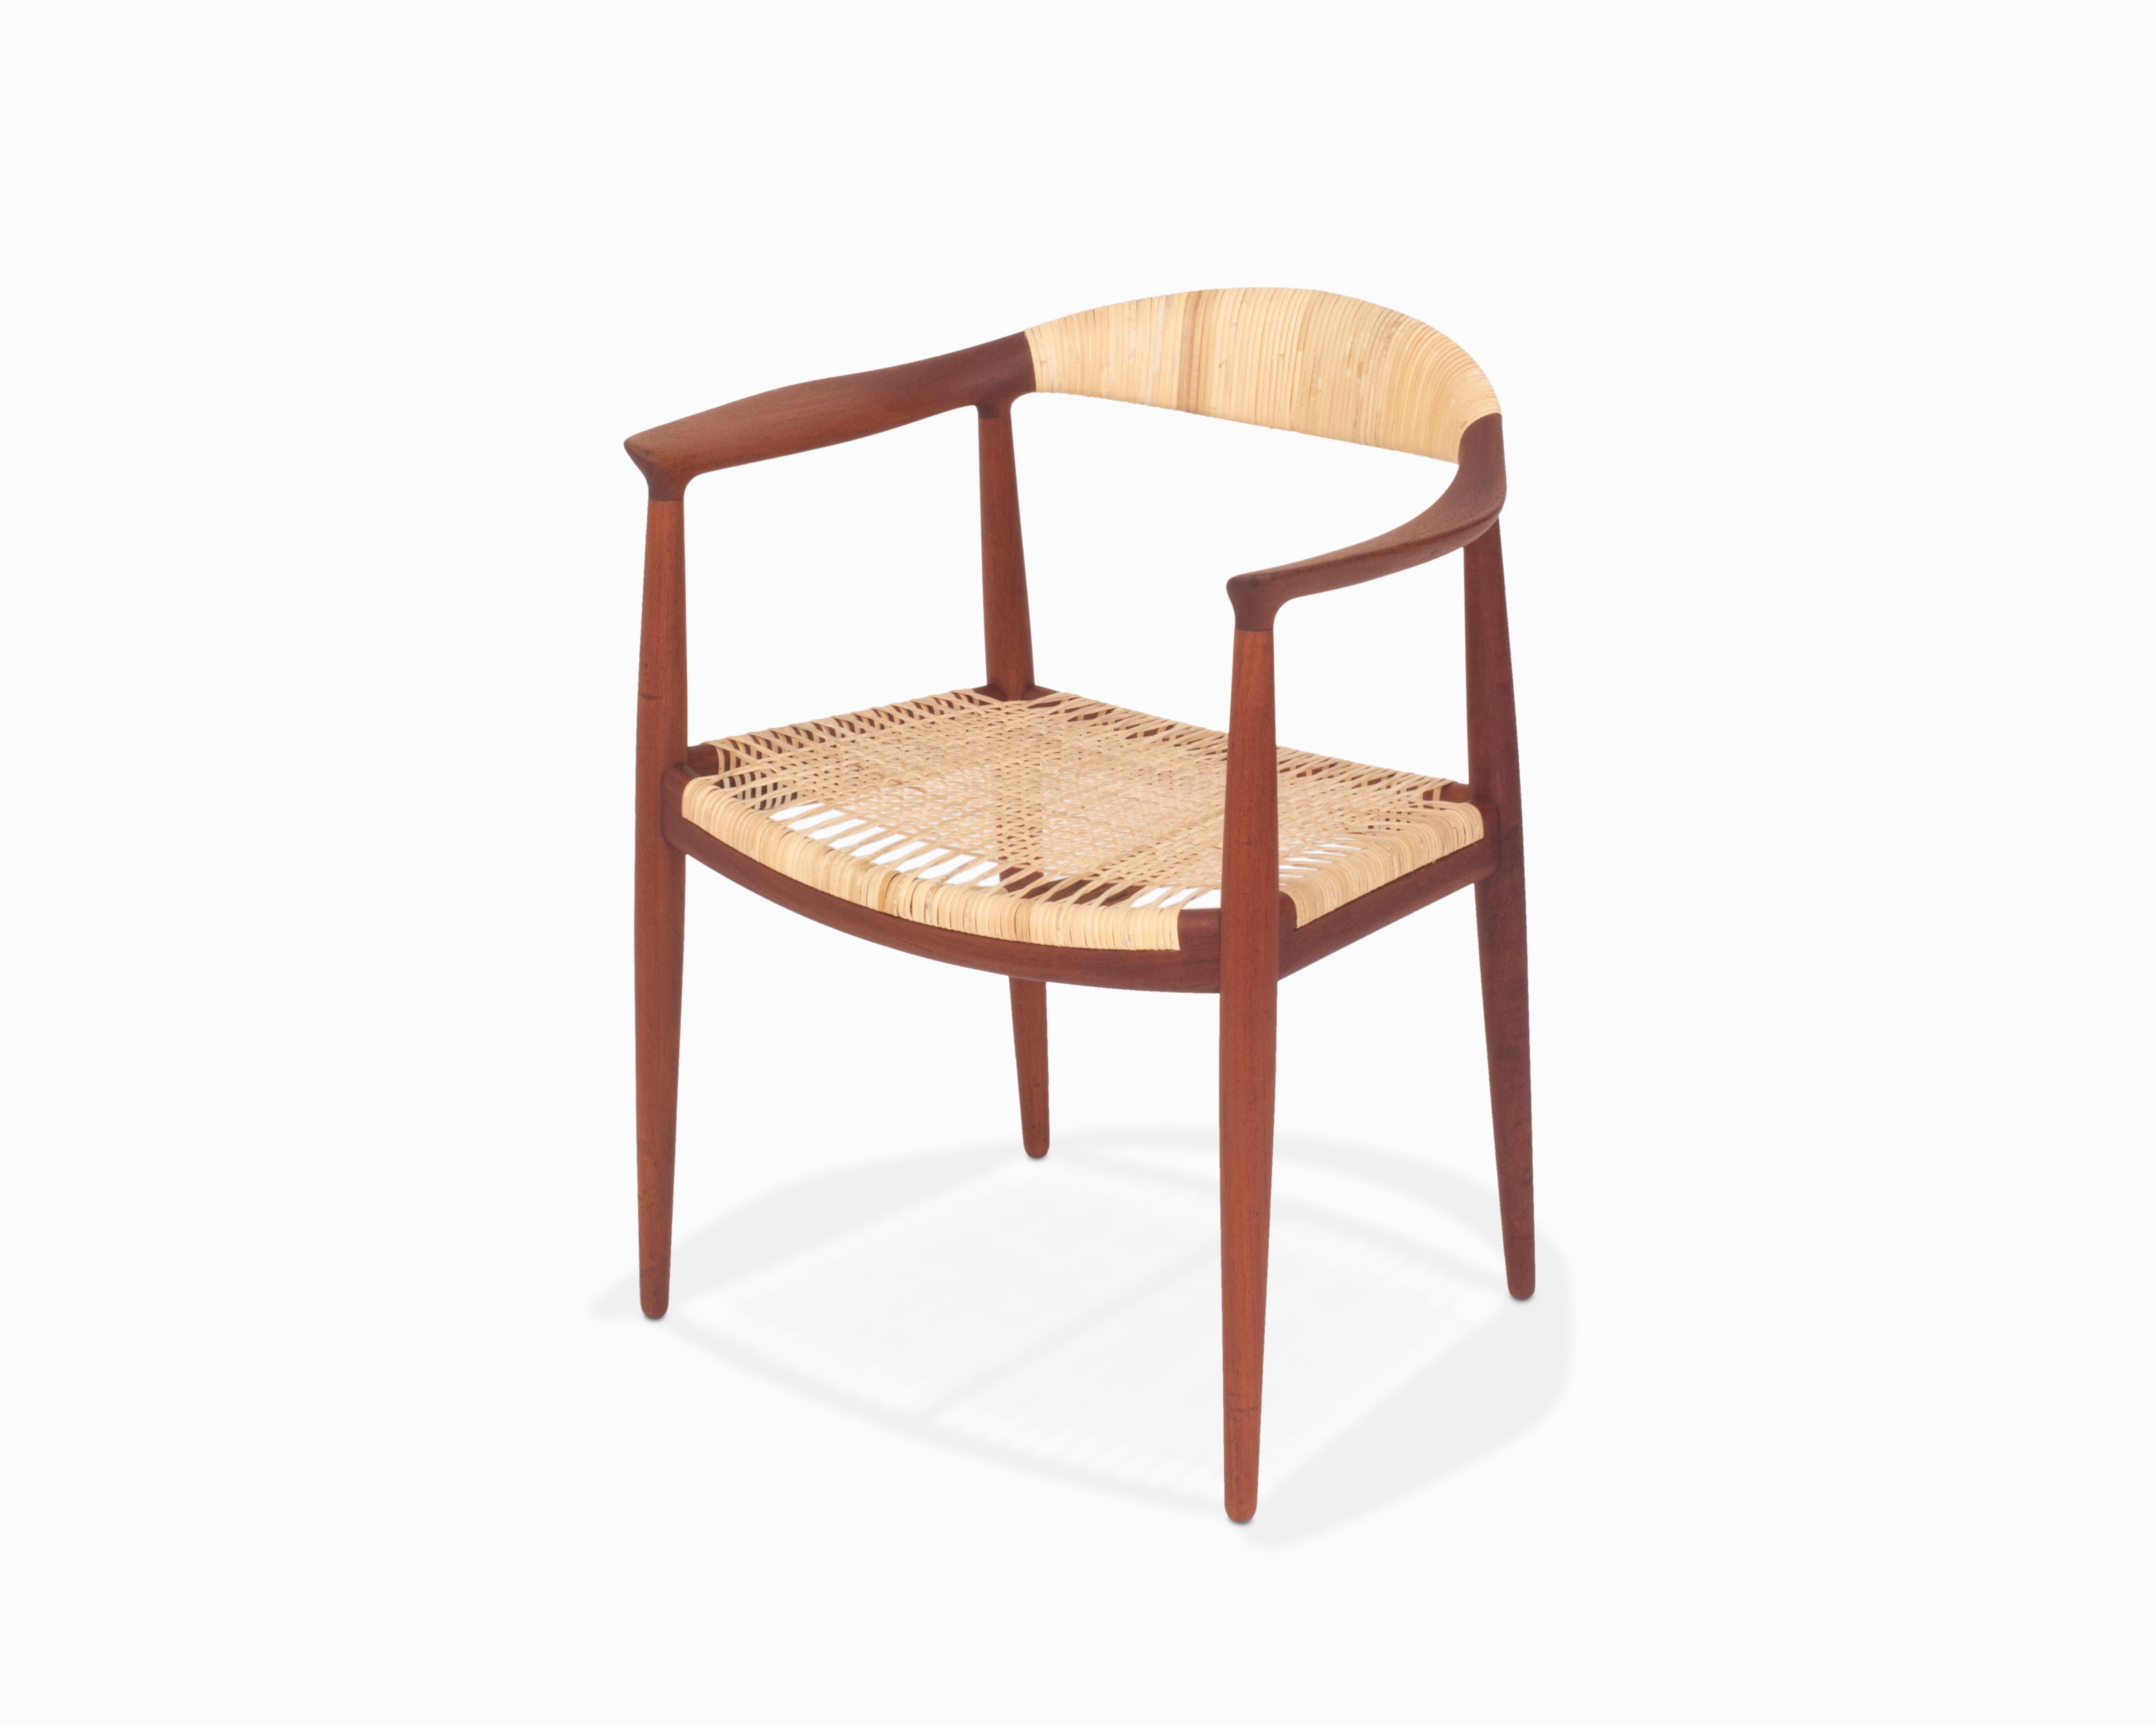 Here is a fantastic example of Hans Wegner's iconic 